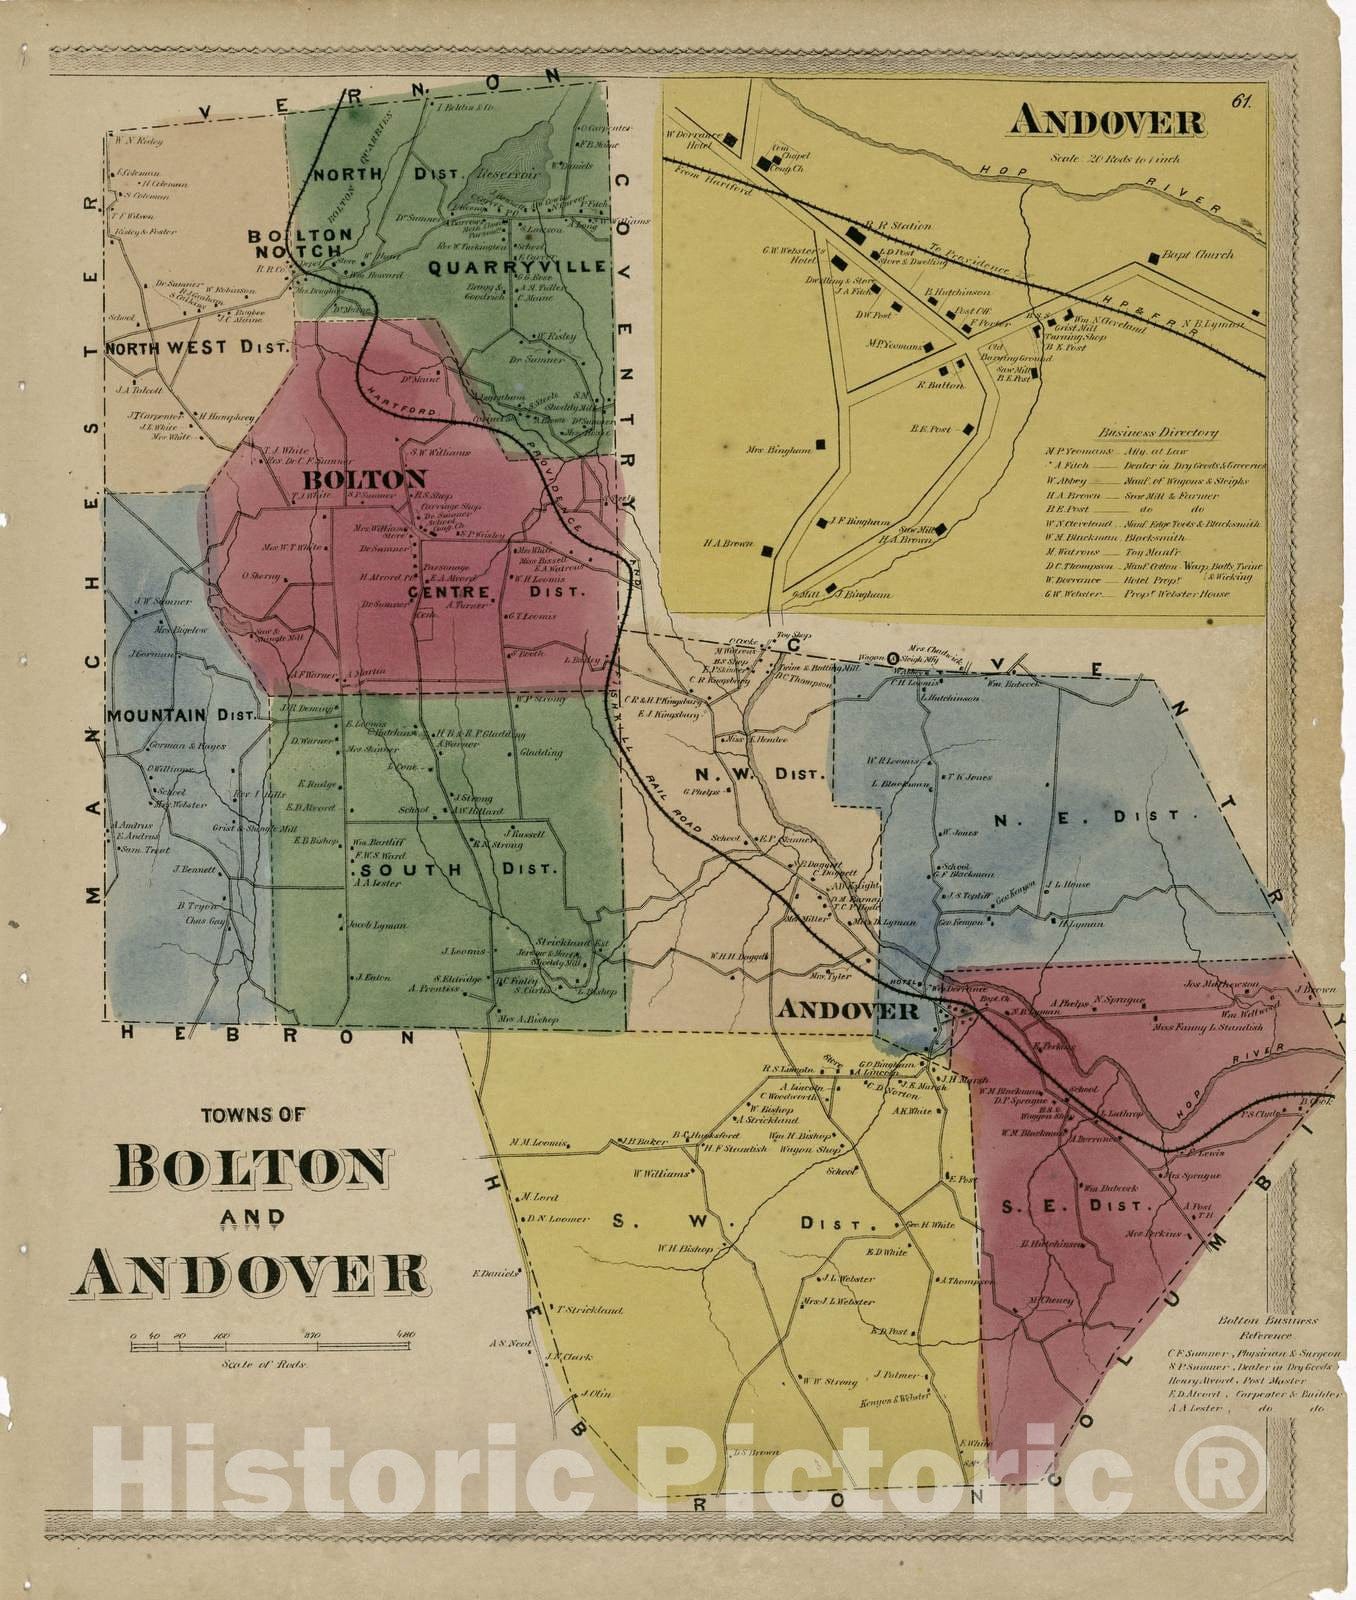 Historic 1869 Map - Atlas of Hartford and Tolland Counties - Towns of Bolton and Andover - Atlas of Hartford and Tolland Counties, Conn.